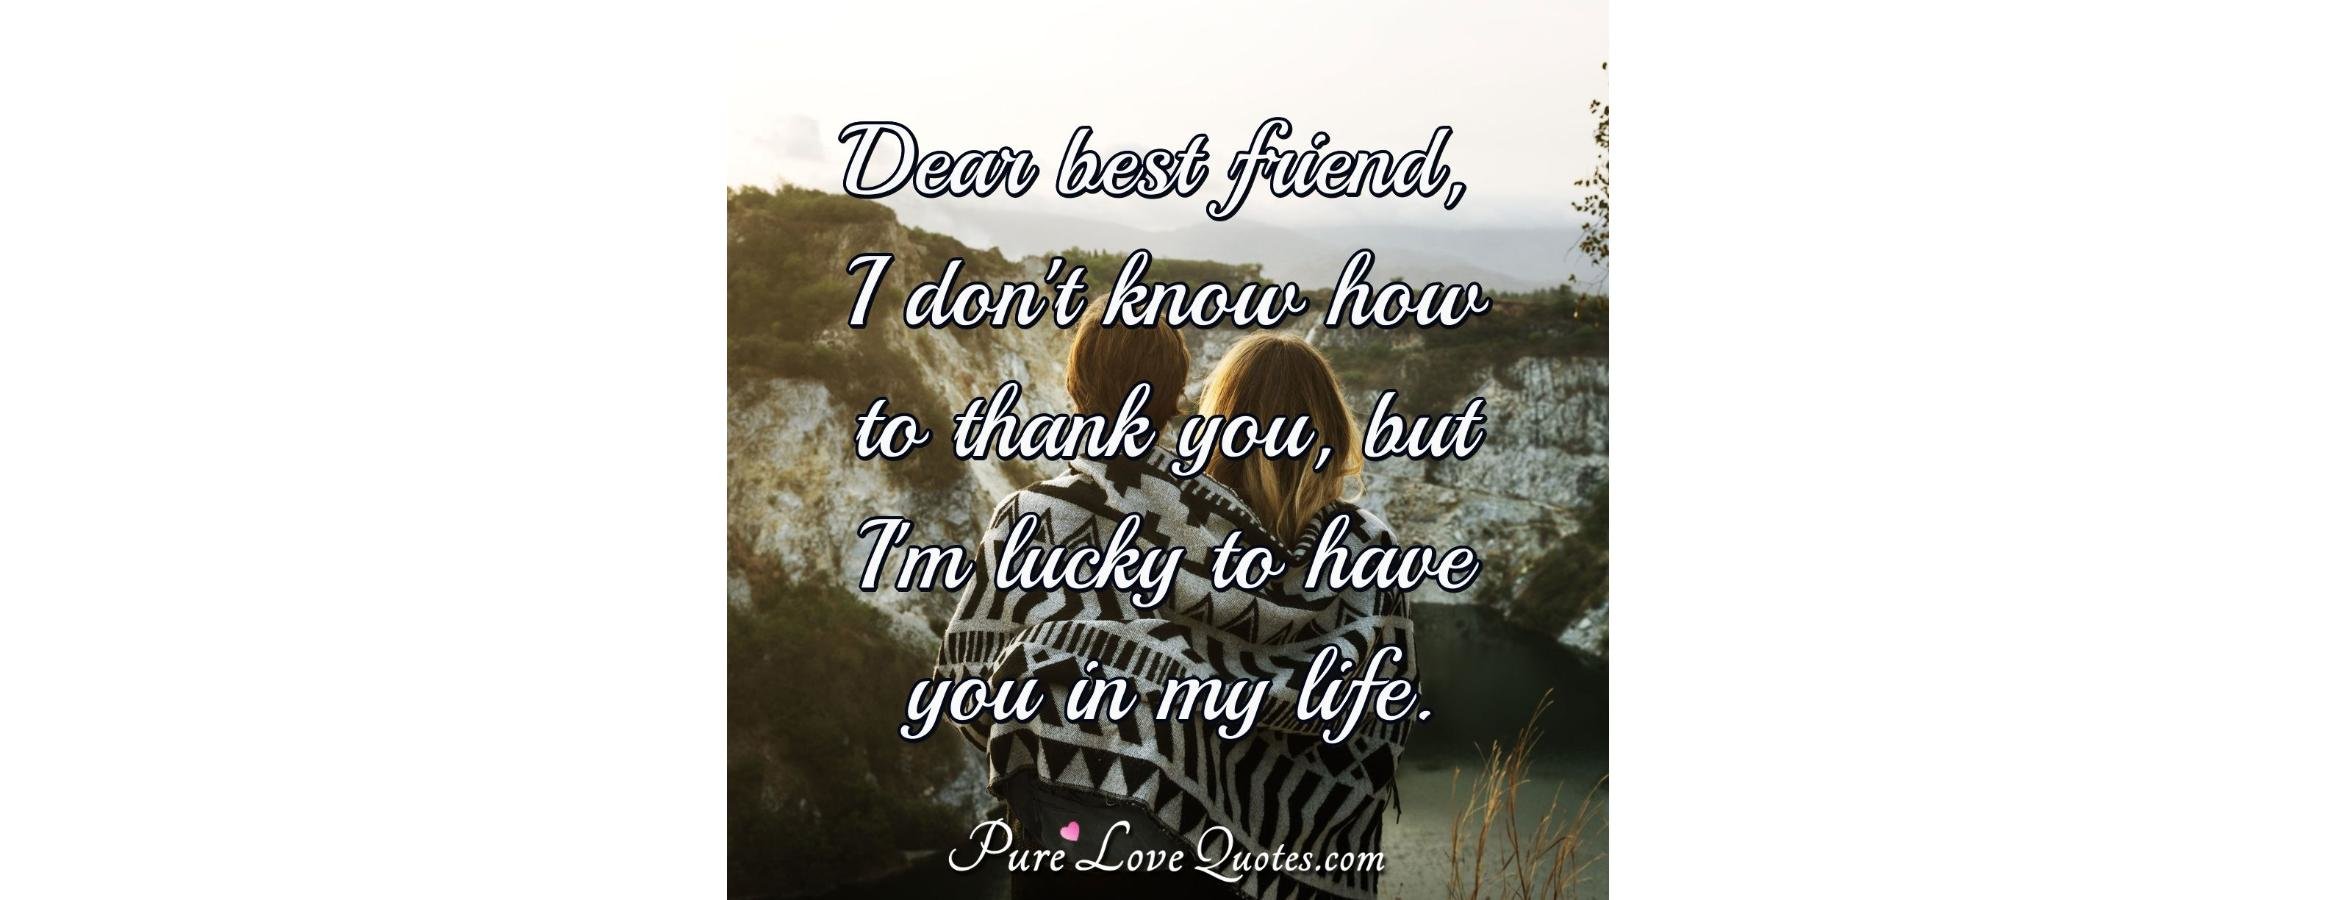 Dear best friend, I don't know how to thank you, but I'm lucky to have